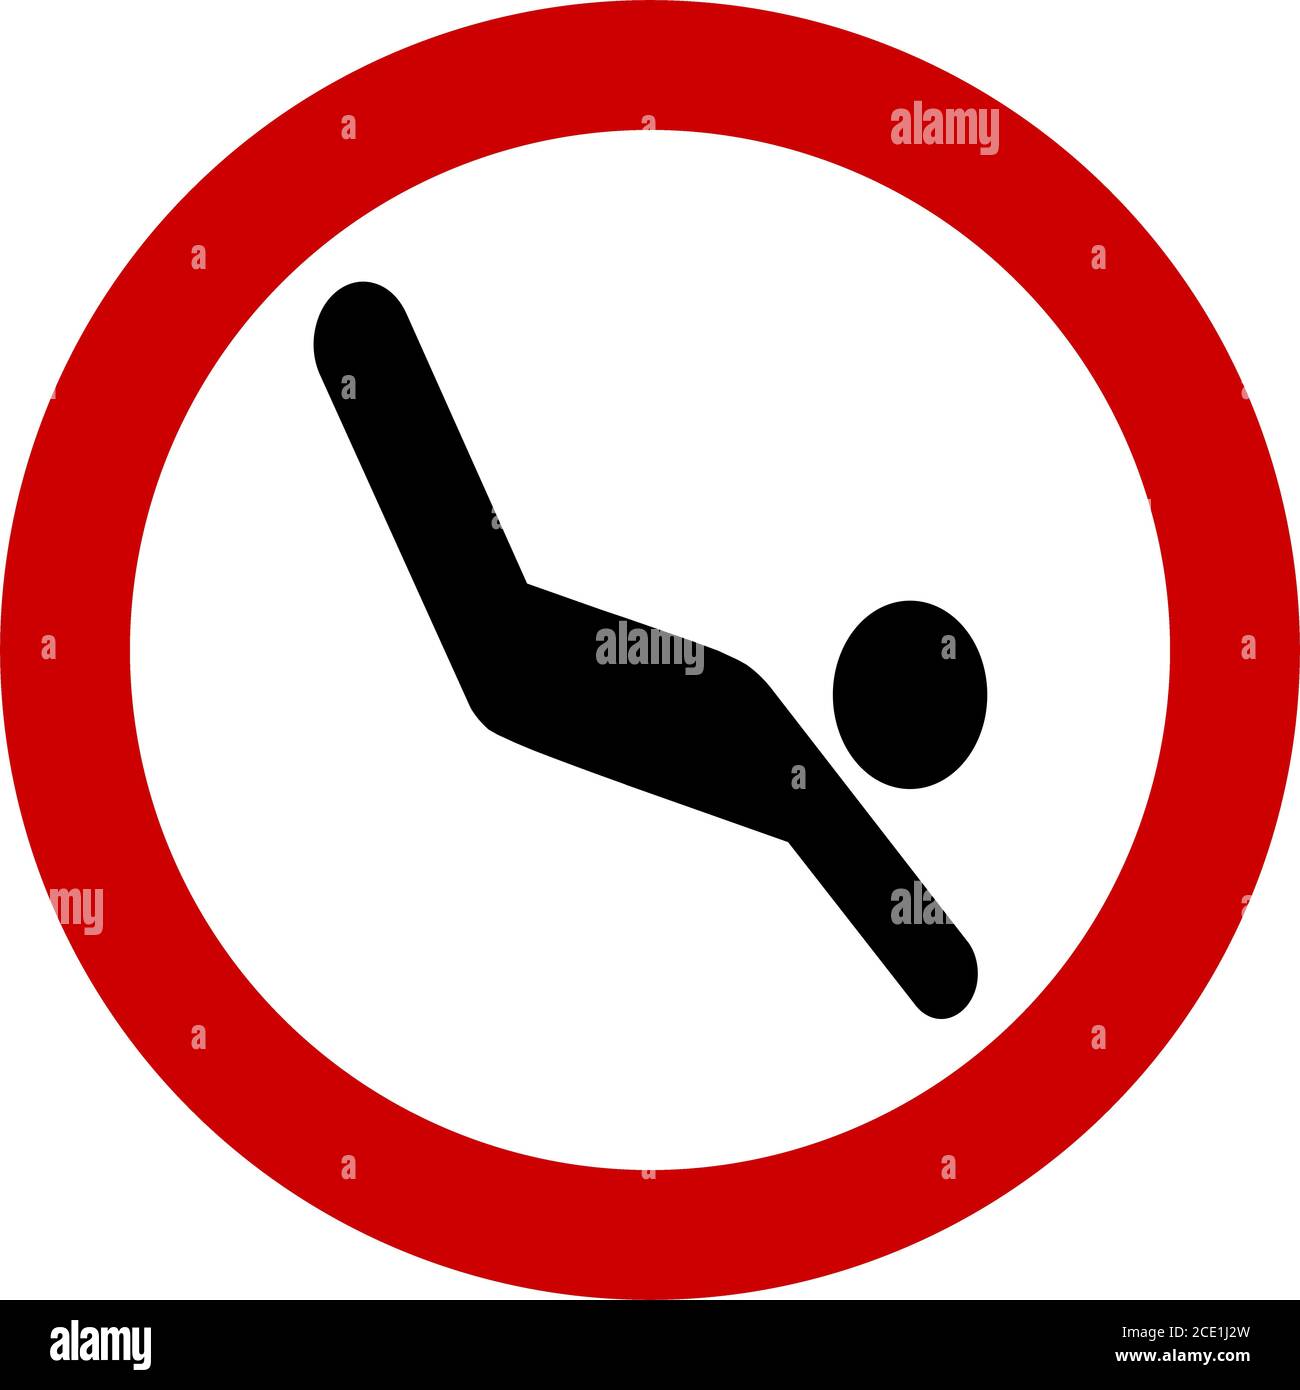 No diving allowed sign Stock Photo